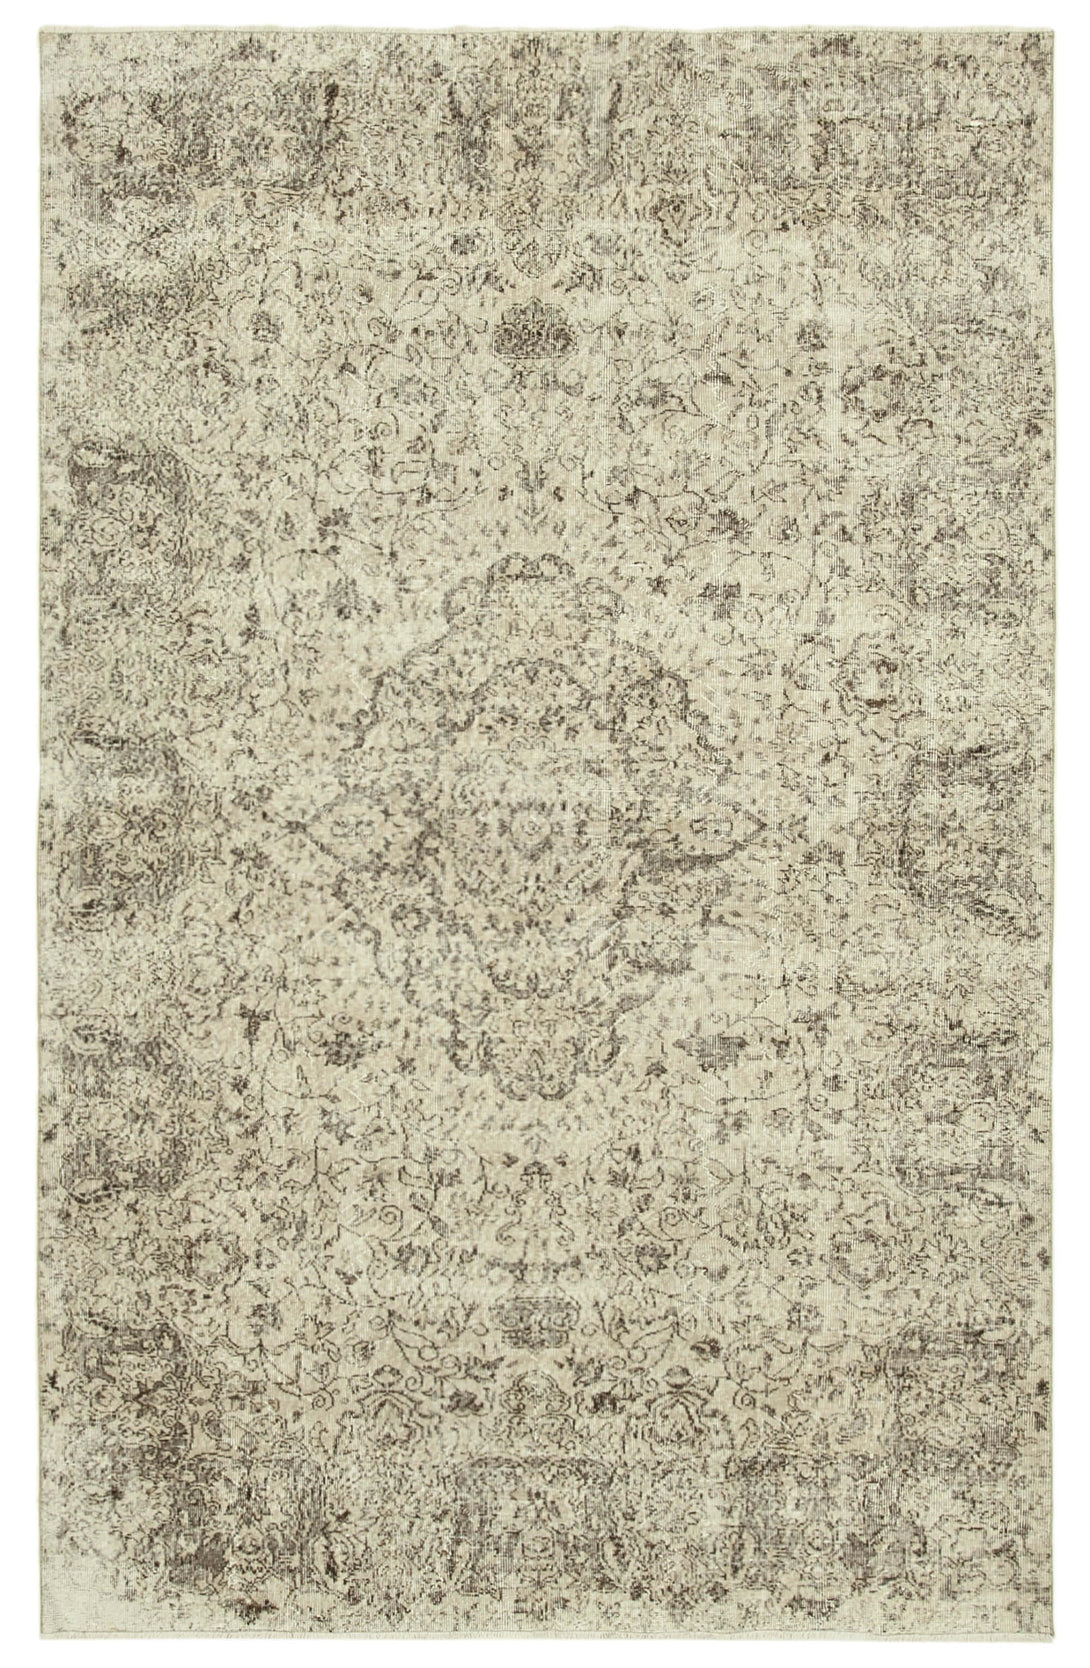 Handmade White Wash Area Rug > Design# OL-AC-39096 > Size: 6'-6" x 10'-4", Carpet Culture Rugs, Handmade Rugs, NYC Rugs, New Rugs, Shop Rugs, Rug Store, Outlet Rugs, SoHo Rugs, Rugs in USA